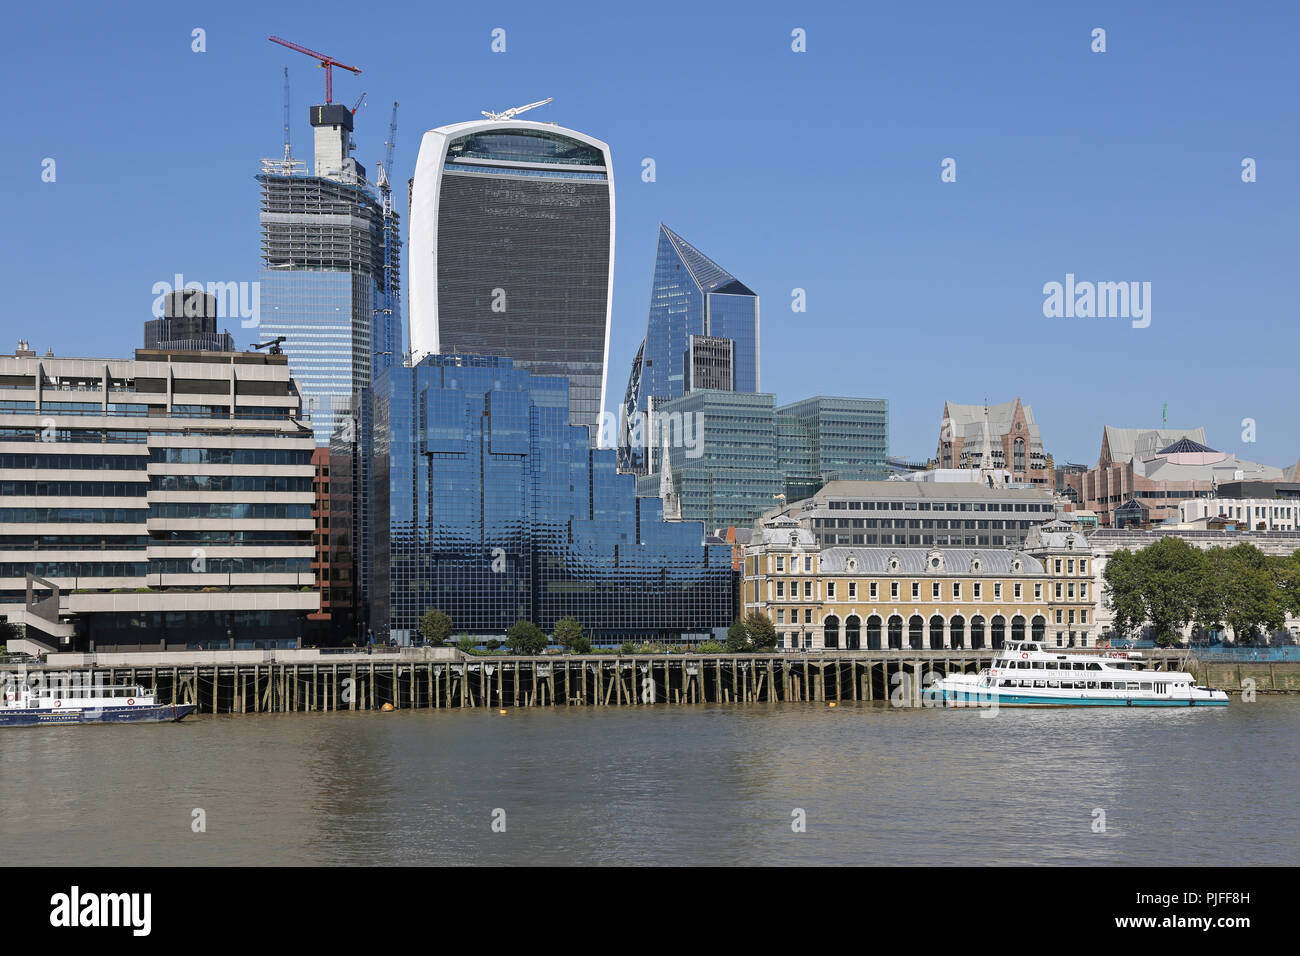 City of London Skyline from the River Thames showing the 'Walkie-Talkie' building, centre, and the old Billingsgate Fish Market, right. Stock Photo